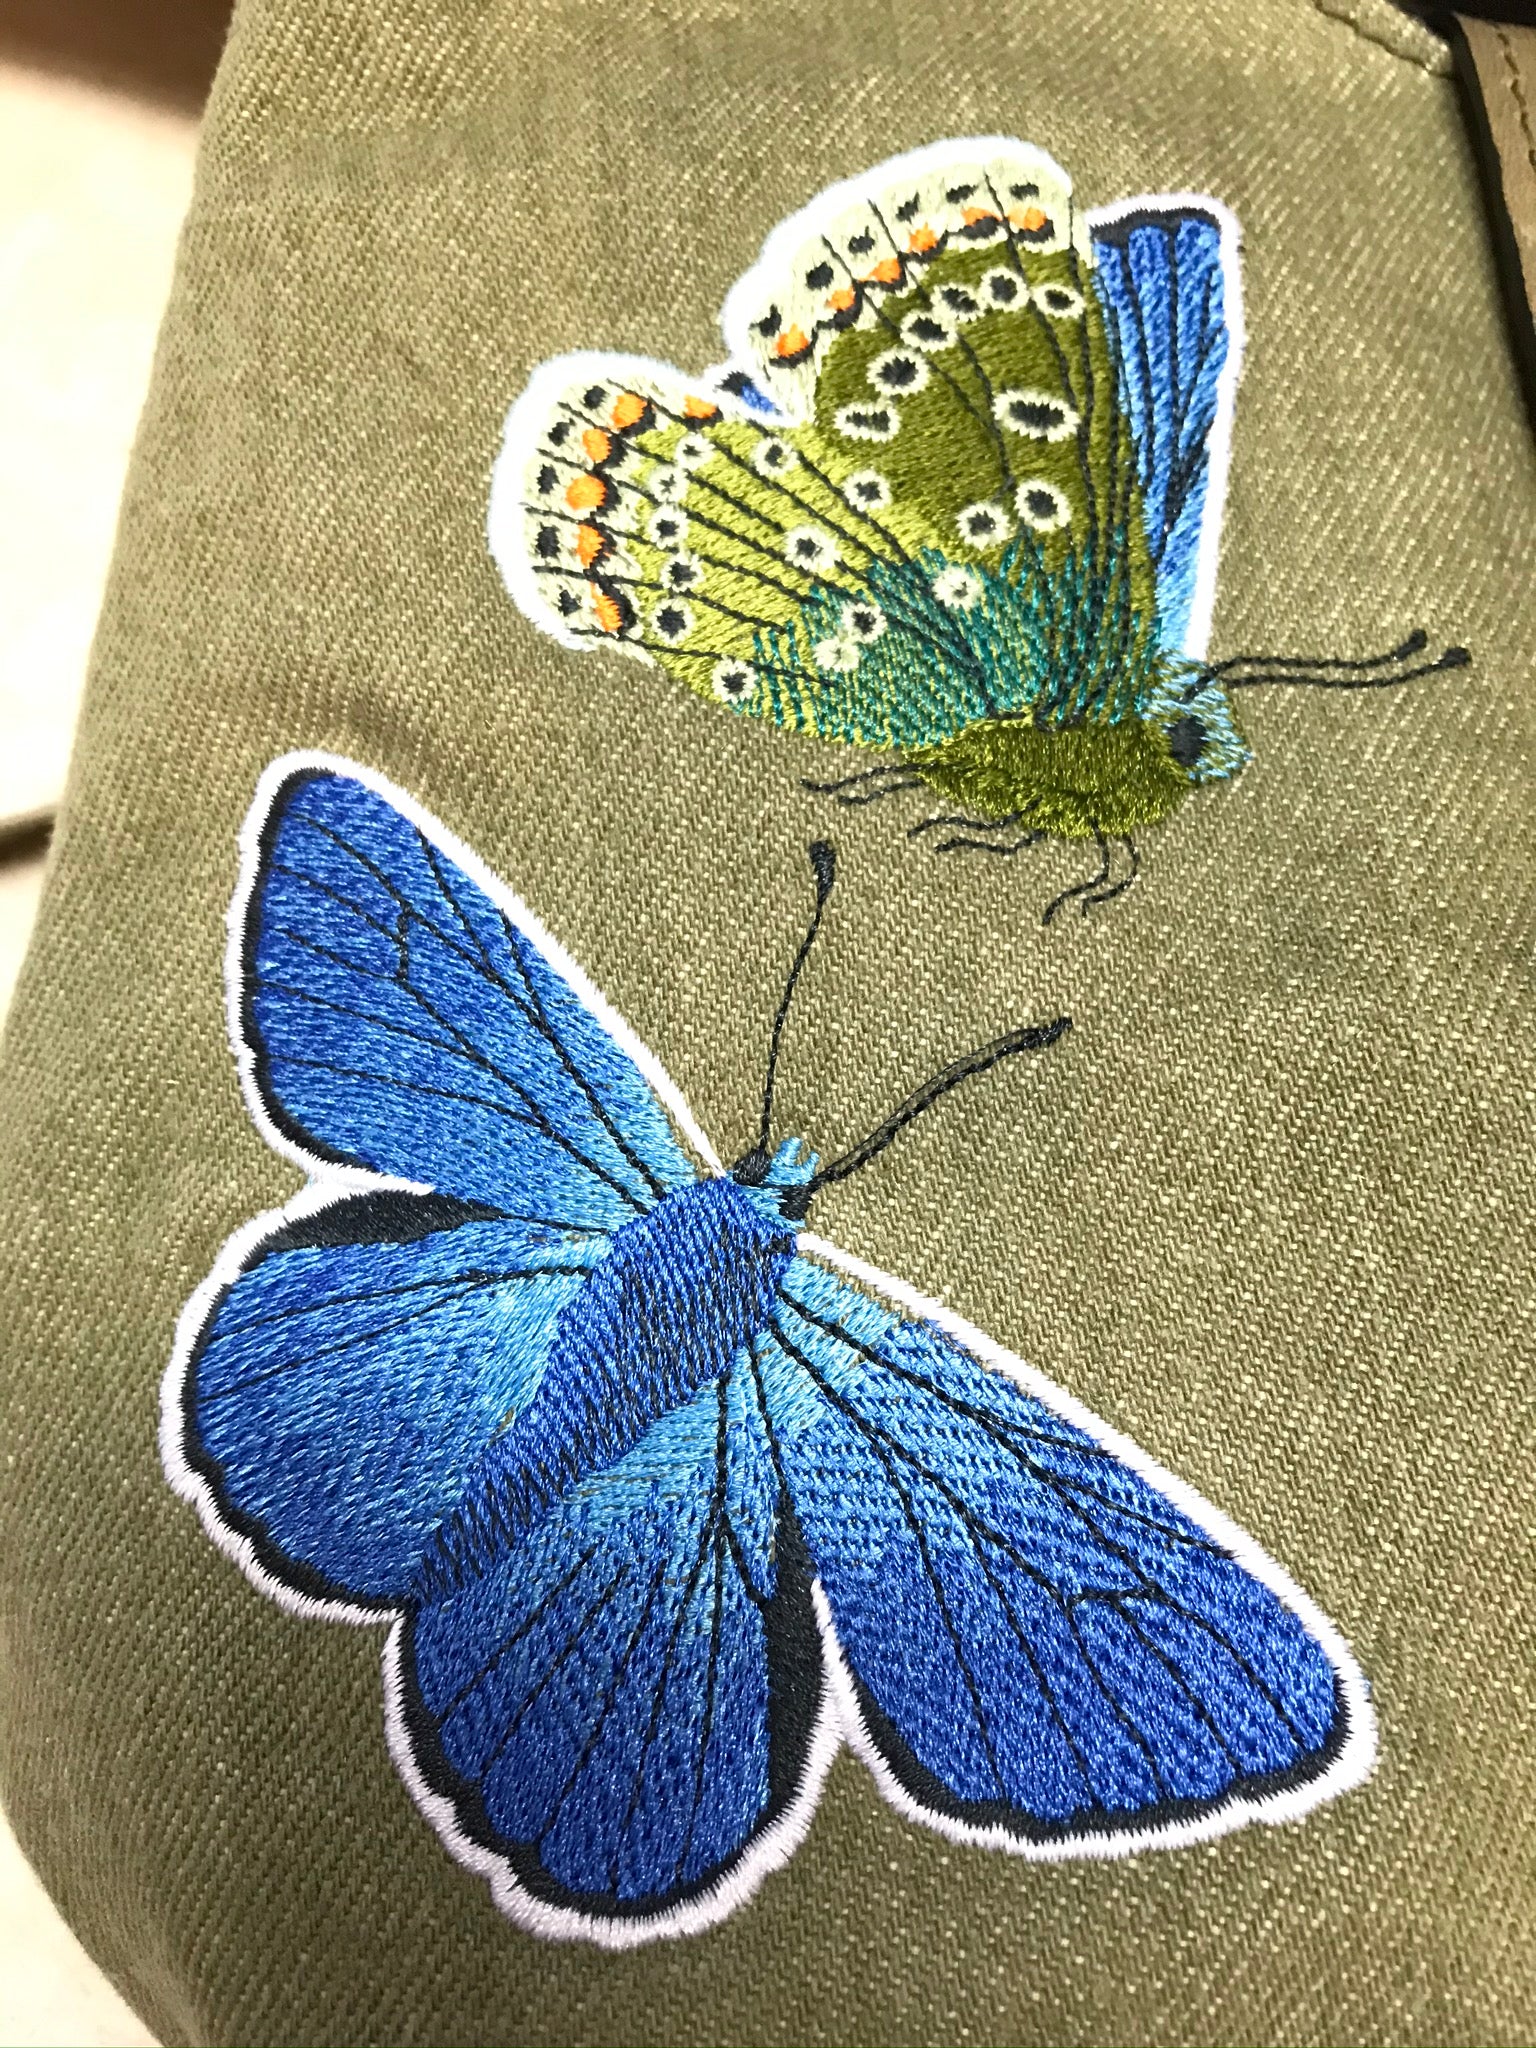 Blue Butterfly on Green Denim Cottagecore Hobo embroidery close-up view